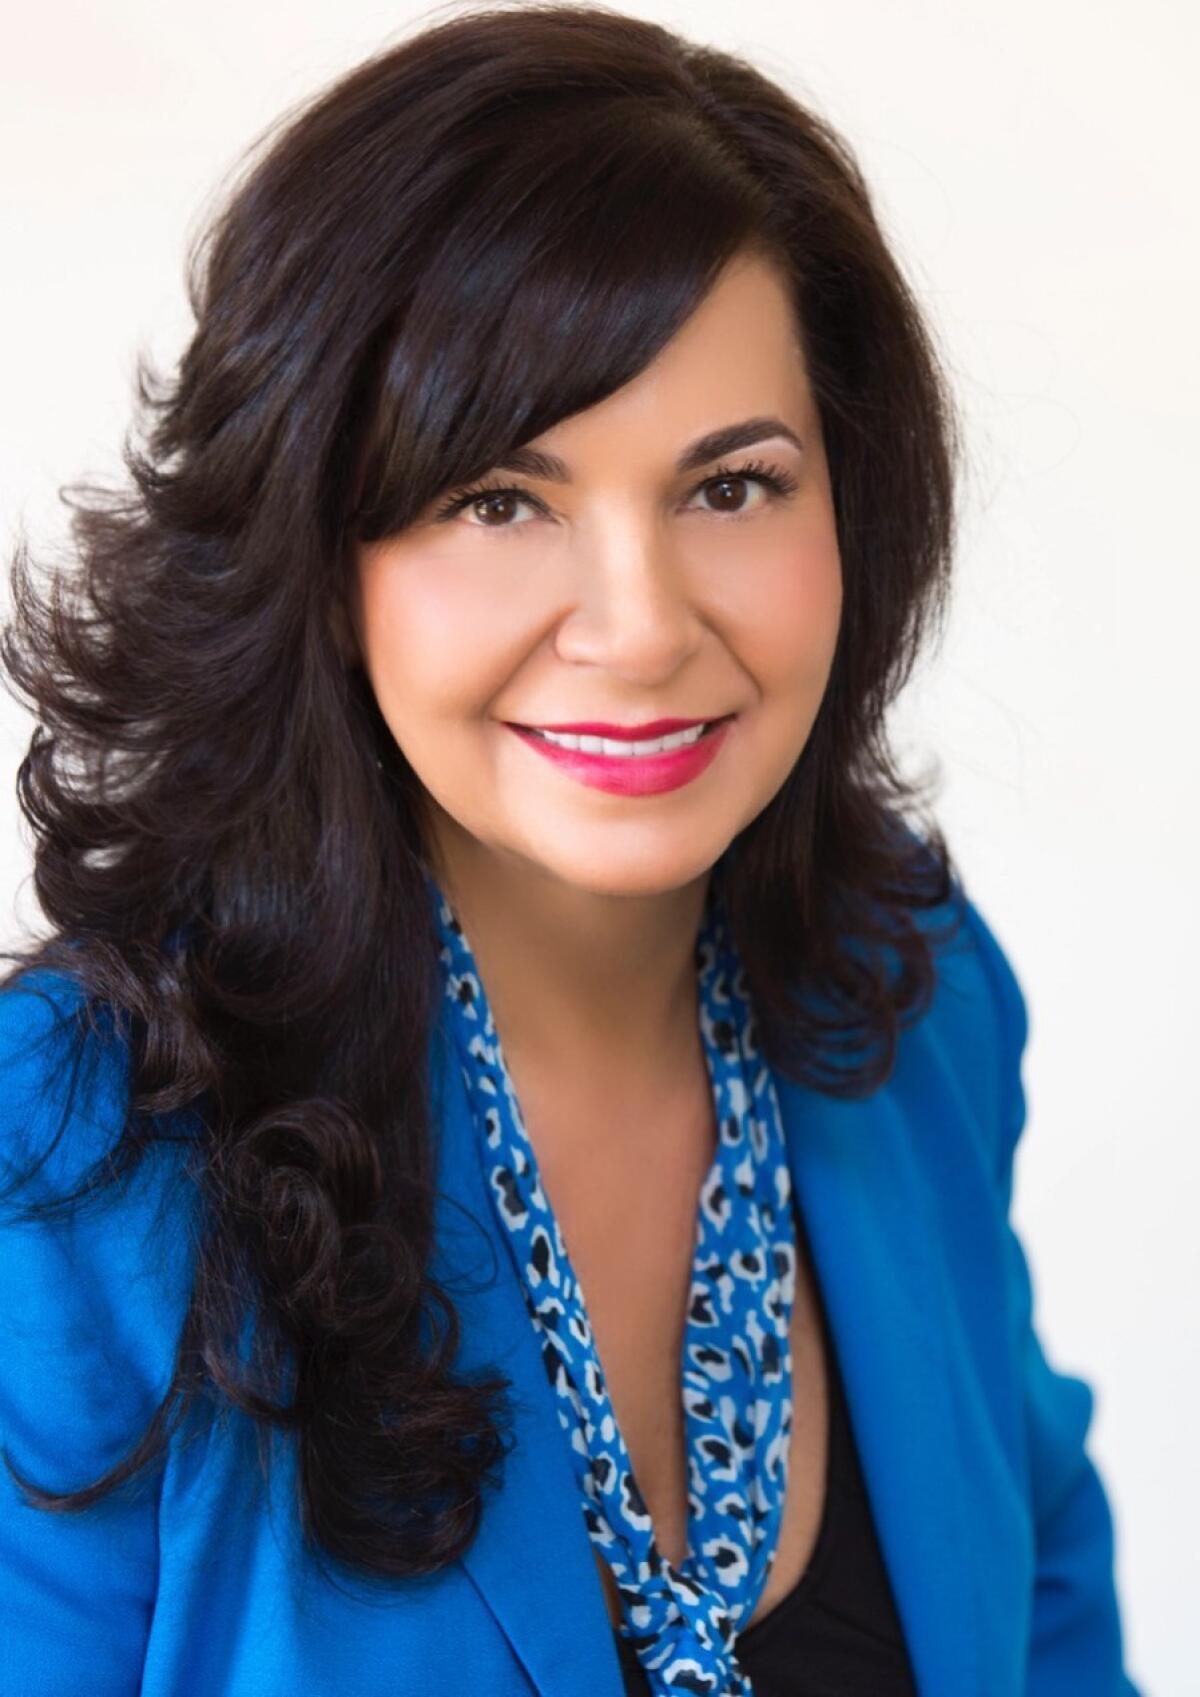 Shohreh Dupuis, pictured, was selected by the Laguna Beach City Council to become the next city manager of Laguna Beach.